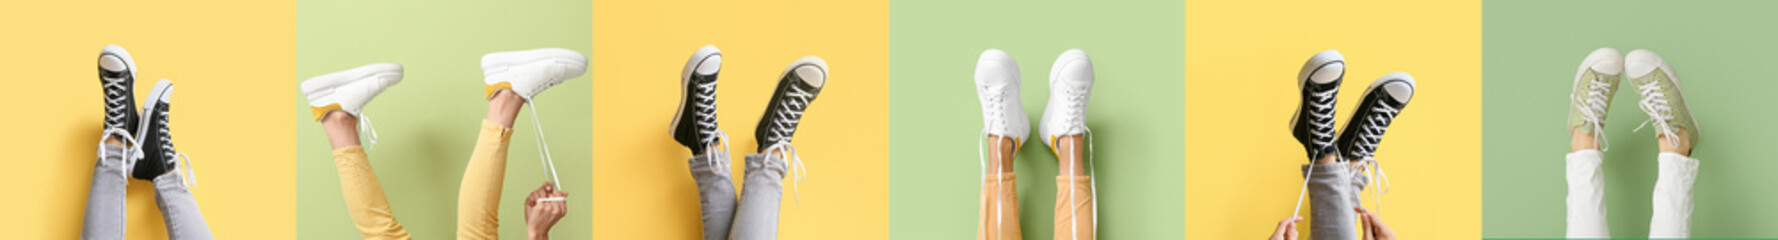 Collage of female legs in sports shoes on yellow and green backgrounds